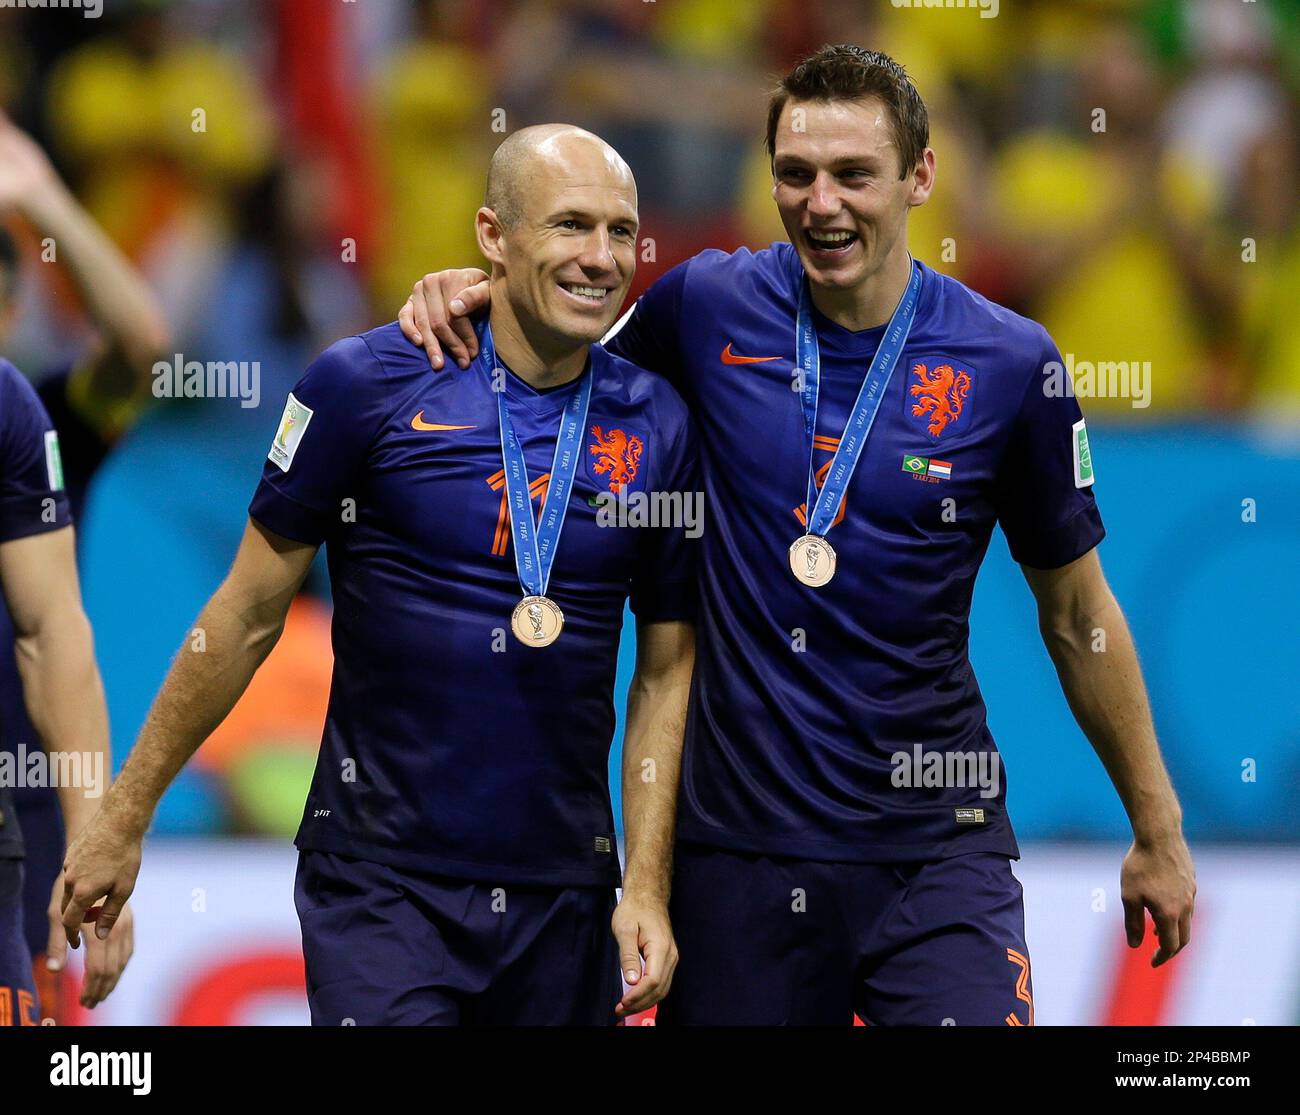 Netherlands' Arjen Robben, left and Stefan de Vrij walk together after medal presentations following their 3-0 victory over Brazil in the World Cup third-place soccer match between Brazil and the Netherlands at the Estadio Nacional in Brasilia, Brazil, Saturday, July 12, 2014. (AP Photo/Natacha Pisarenko) Stock Photo